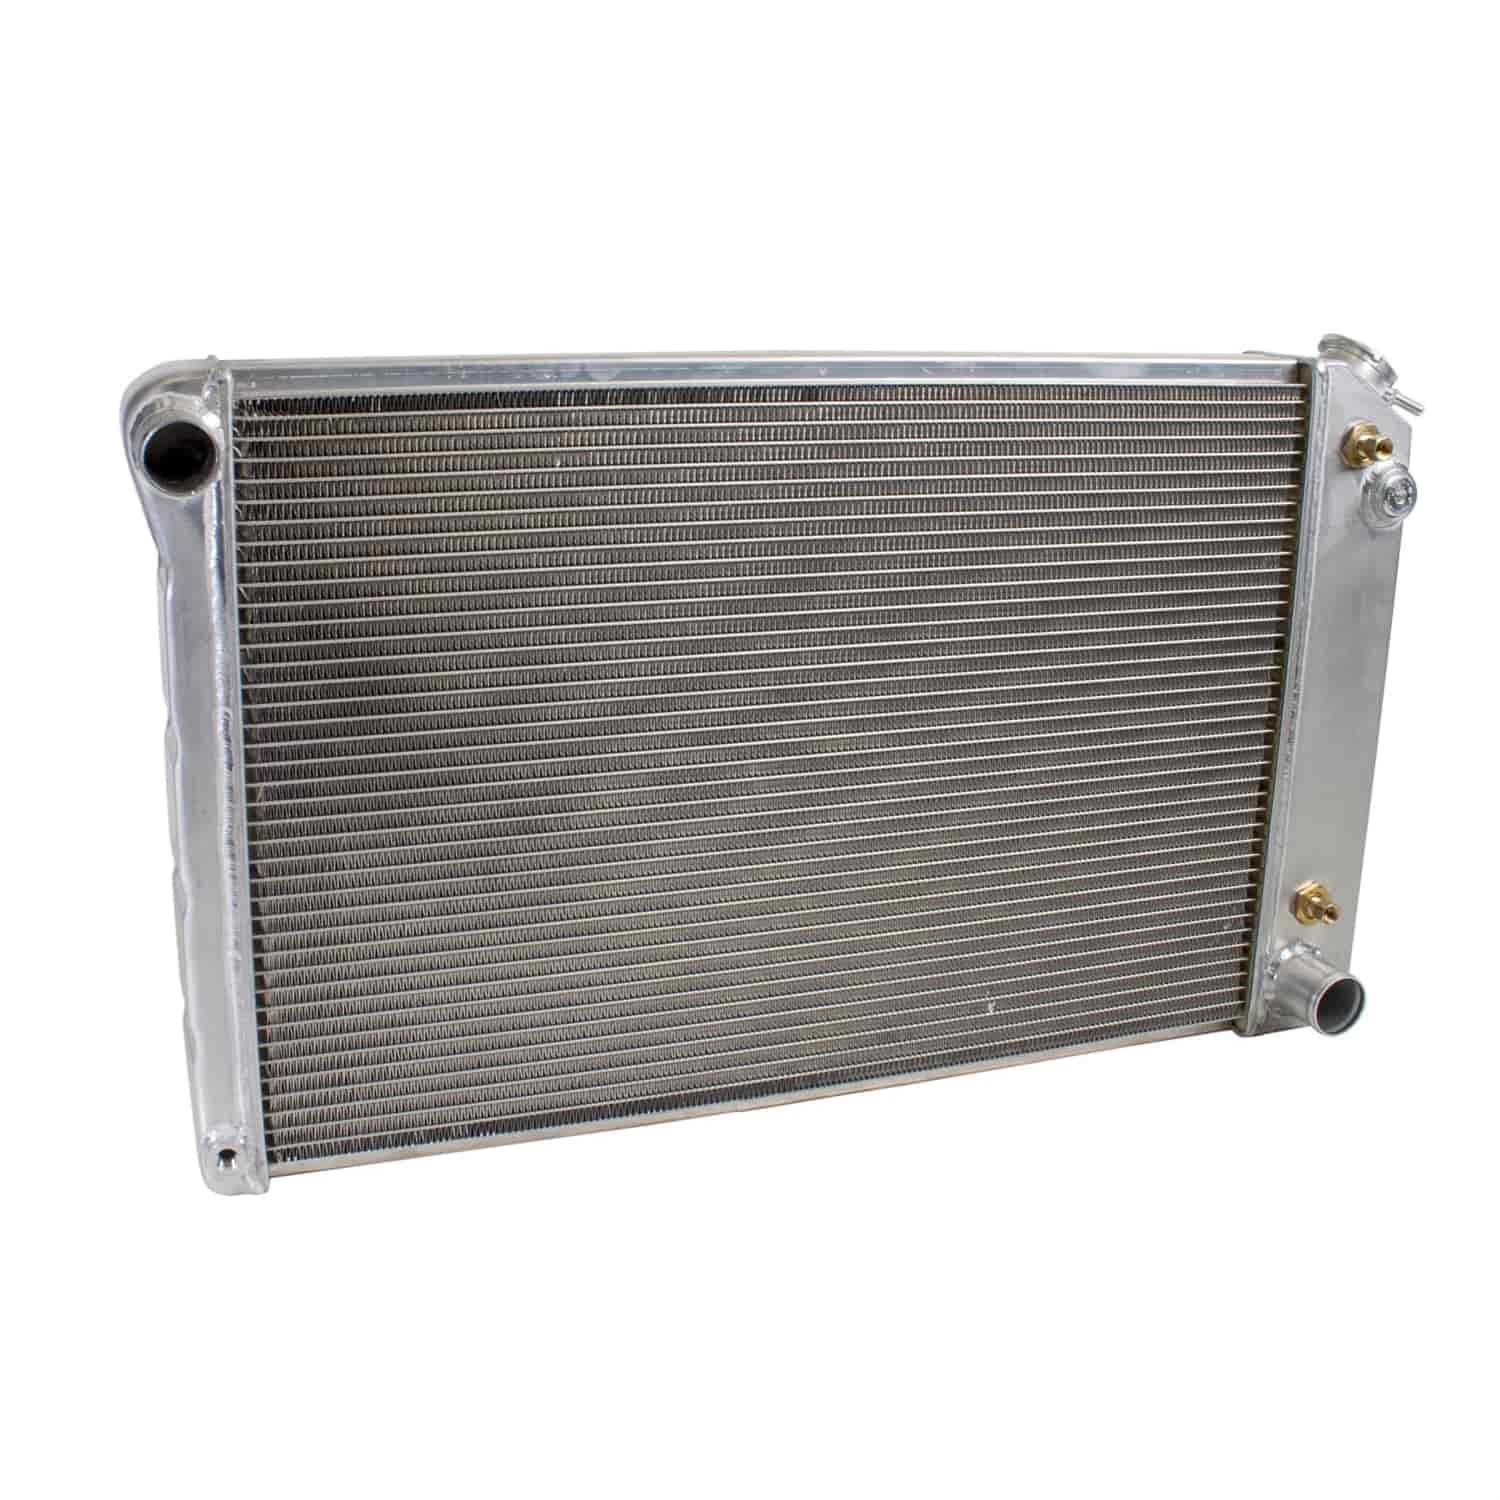 ExactFit Radiator for GM 1968-1977 A Body, 1978-1988 G Body, 1970-1981 F Body with Transmission Cooler